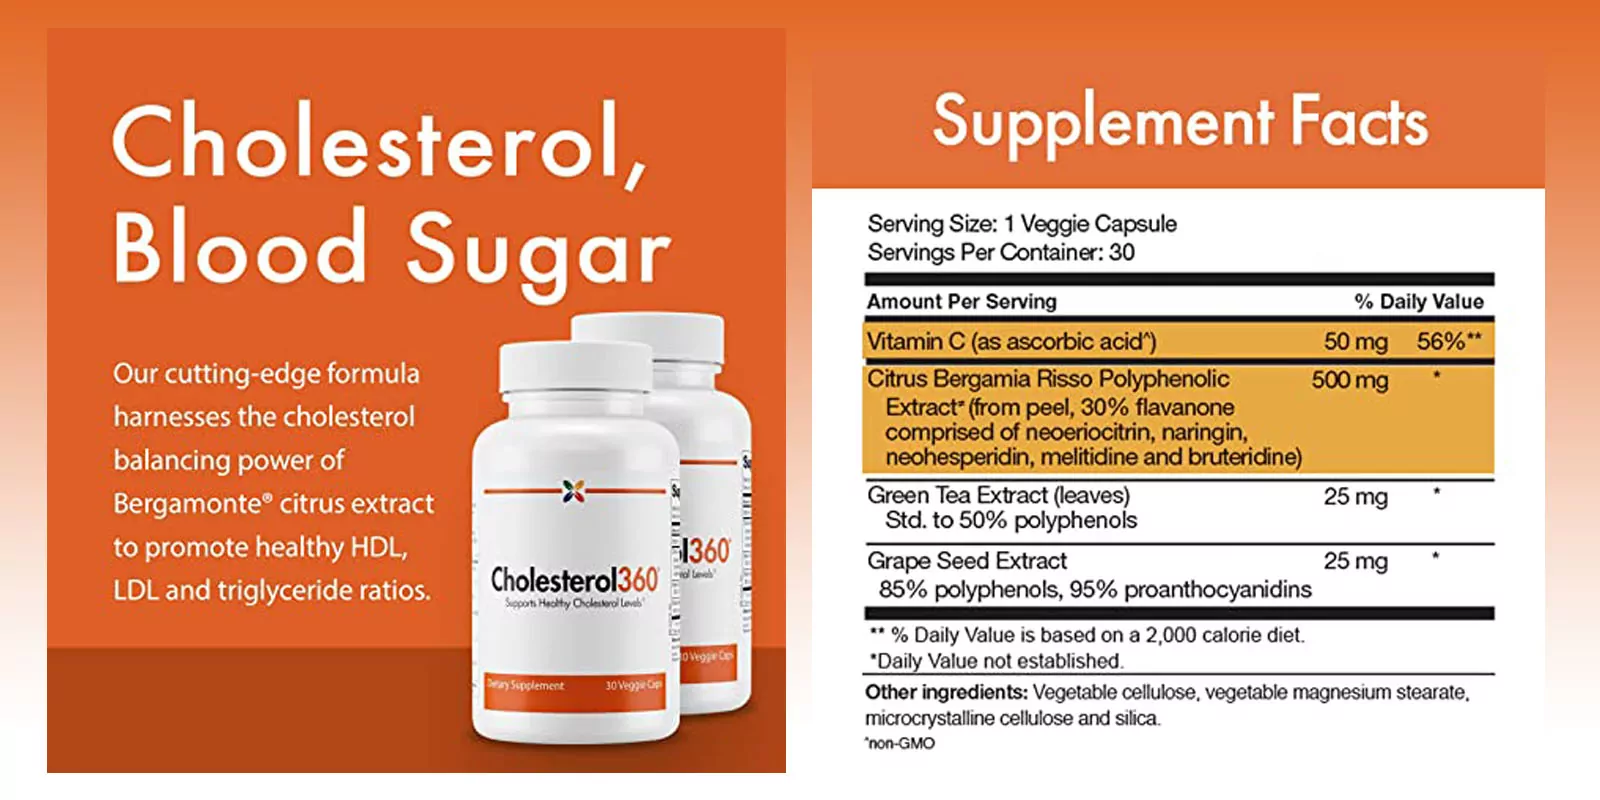 Cholesterol 360 Supplement Facts